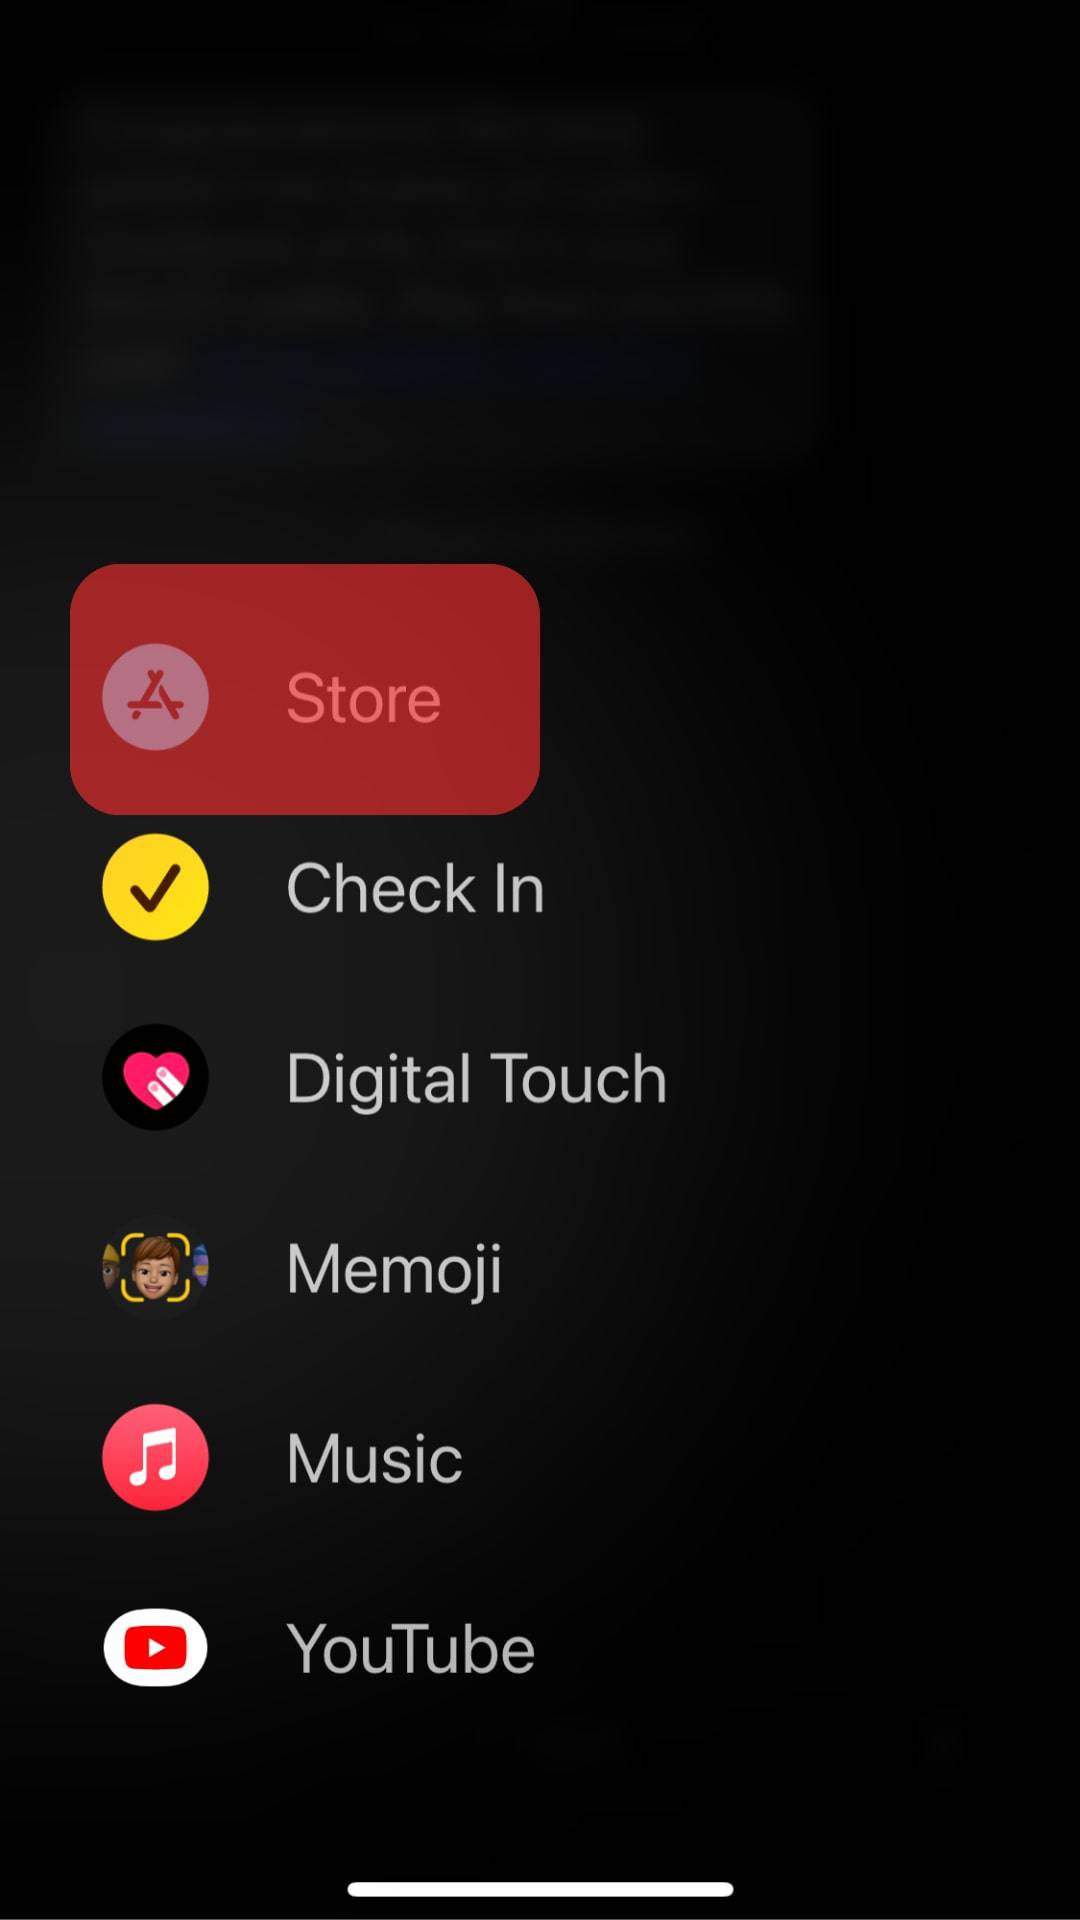 Tap On The Apple Store Icon In The Navigation Drawer At The Bottom.